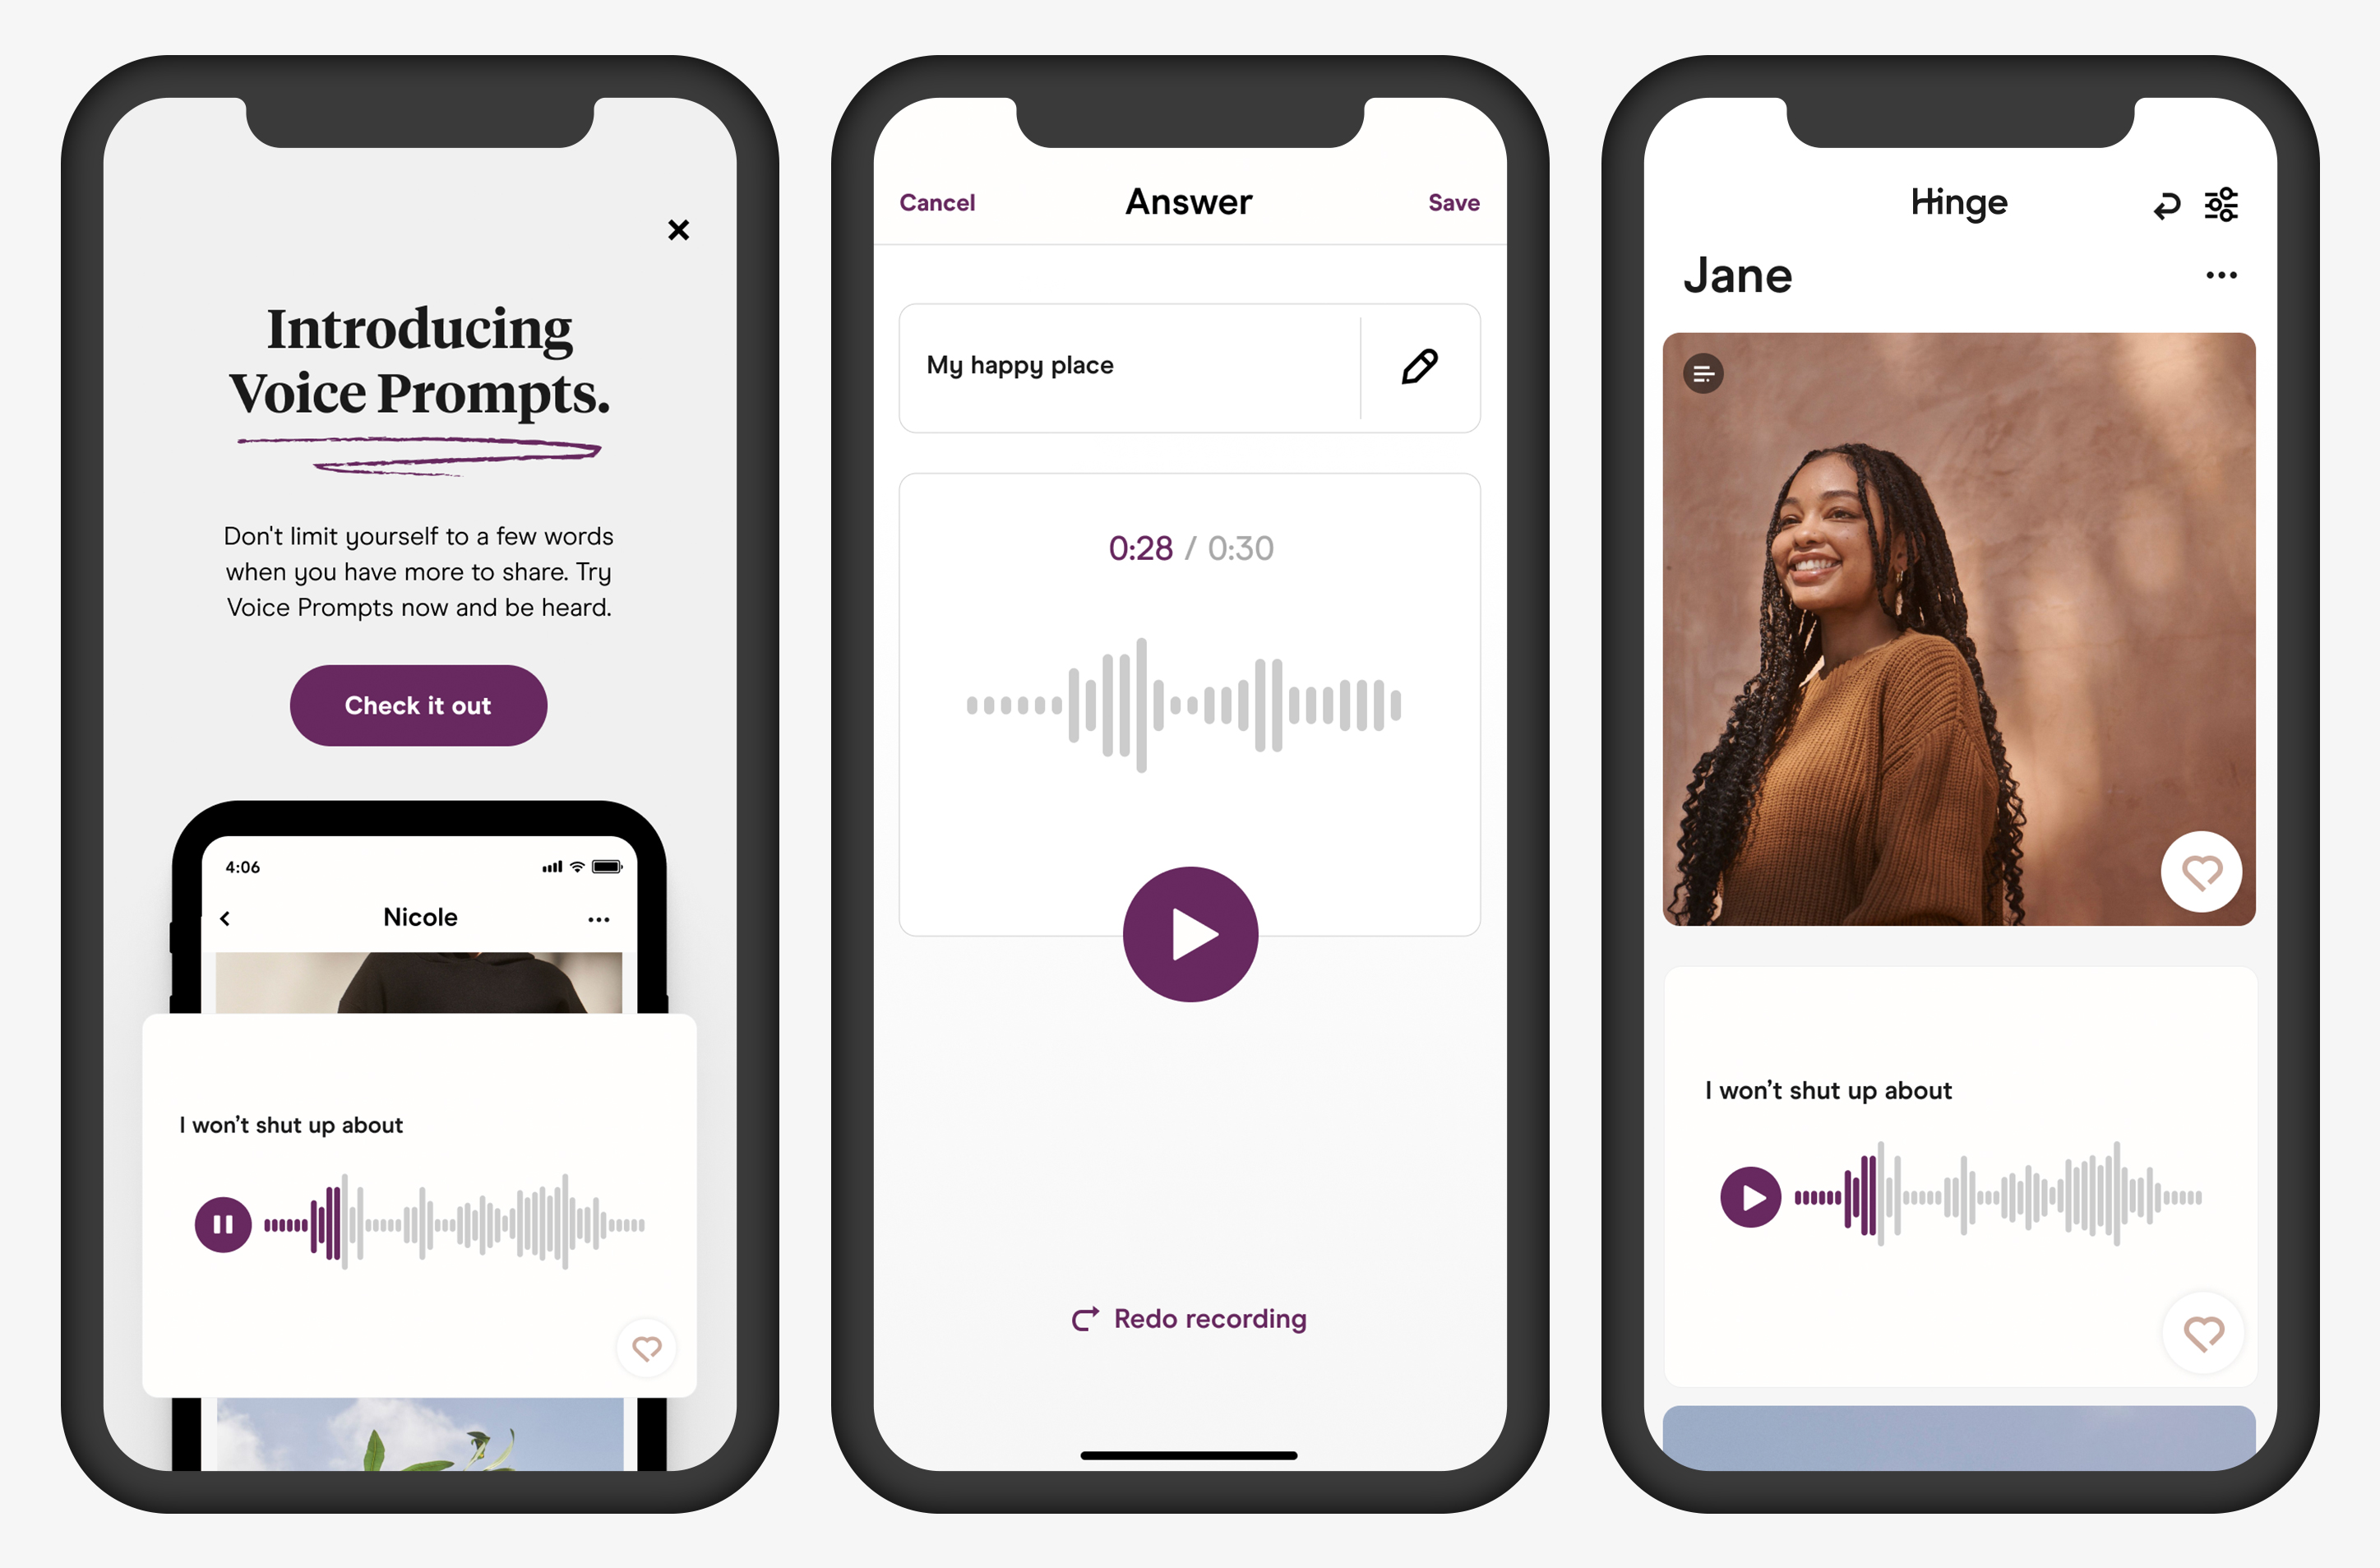 Hinge Announces Audio Expansion With ‘Voice Prompts’ and ‘Voice Notes’